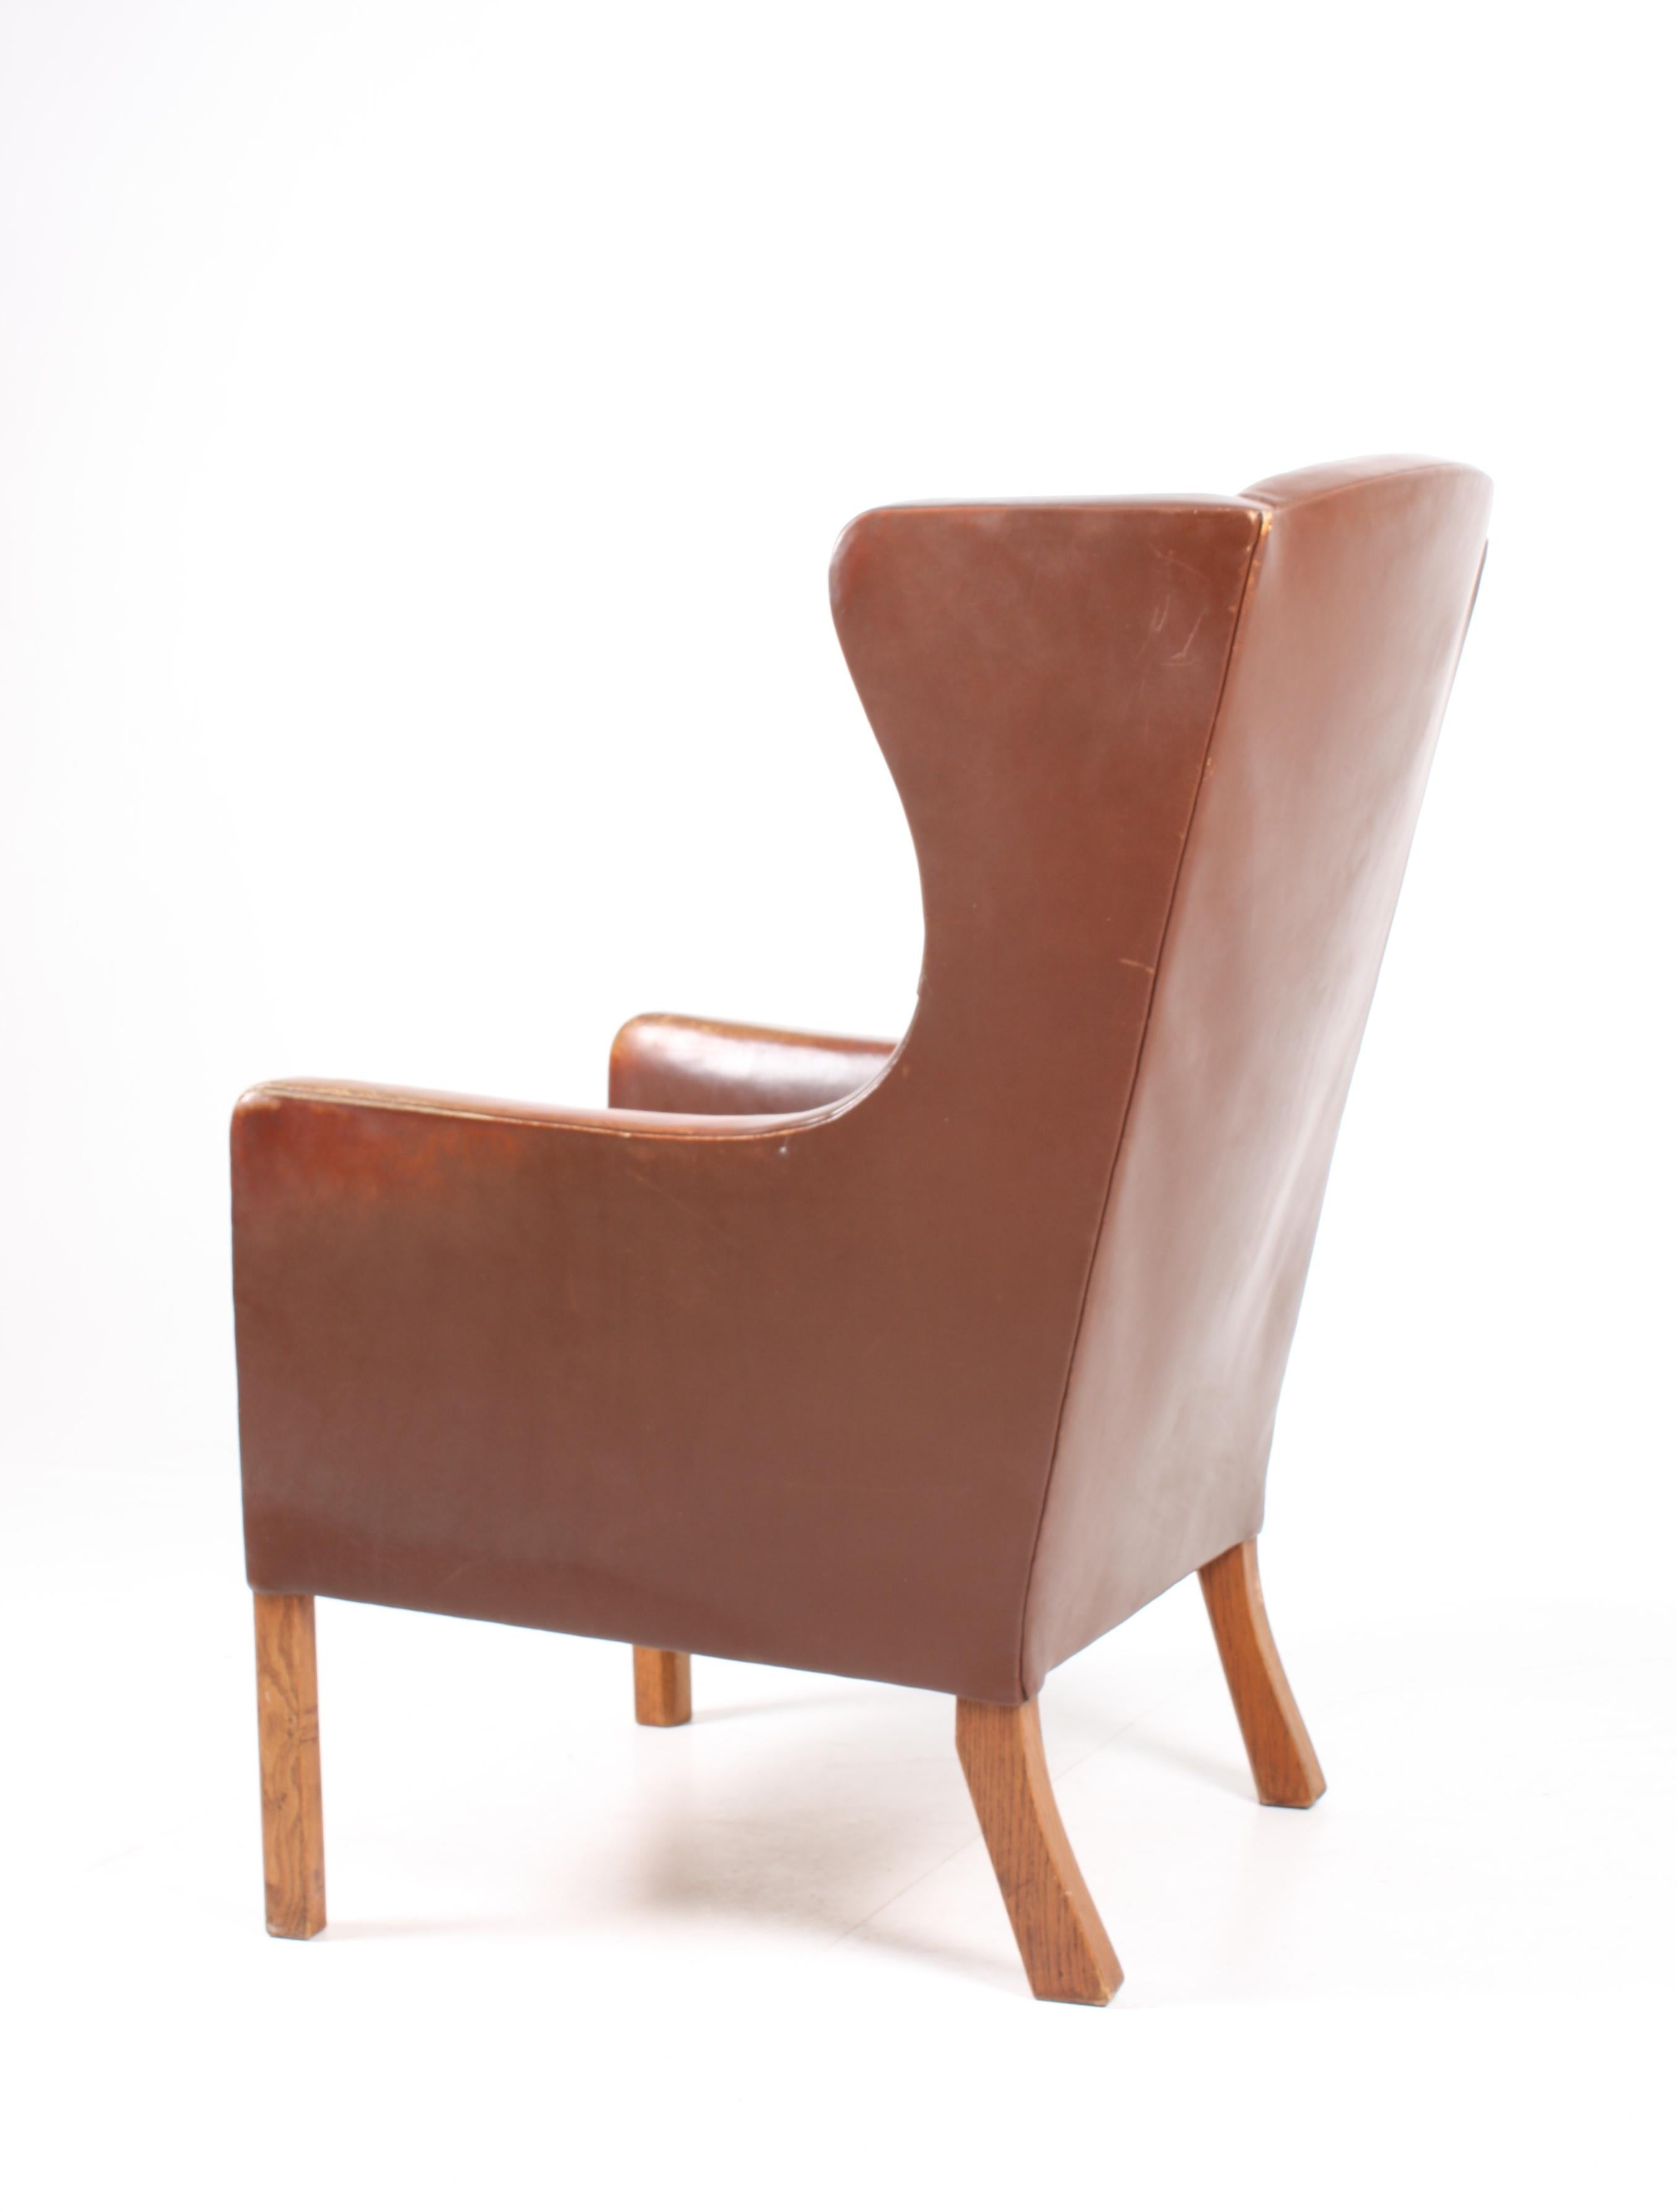 Comfortable wingback chair in well patinated leather on a solid oak frame. Designed by MAA. Børge Mogensen for FDB in 1950. Great original condition. Made in Denmark.